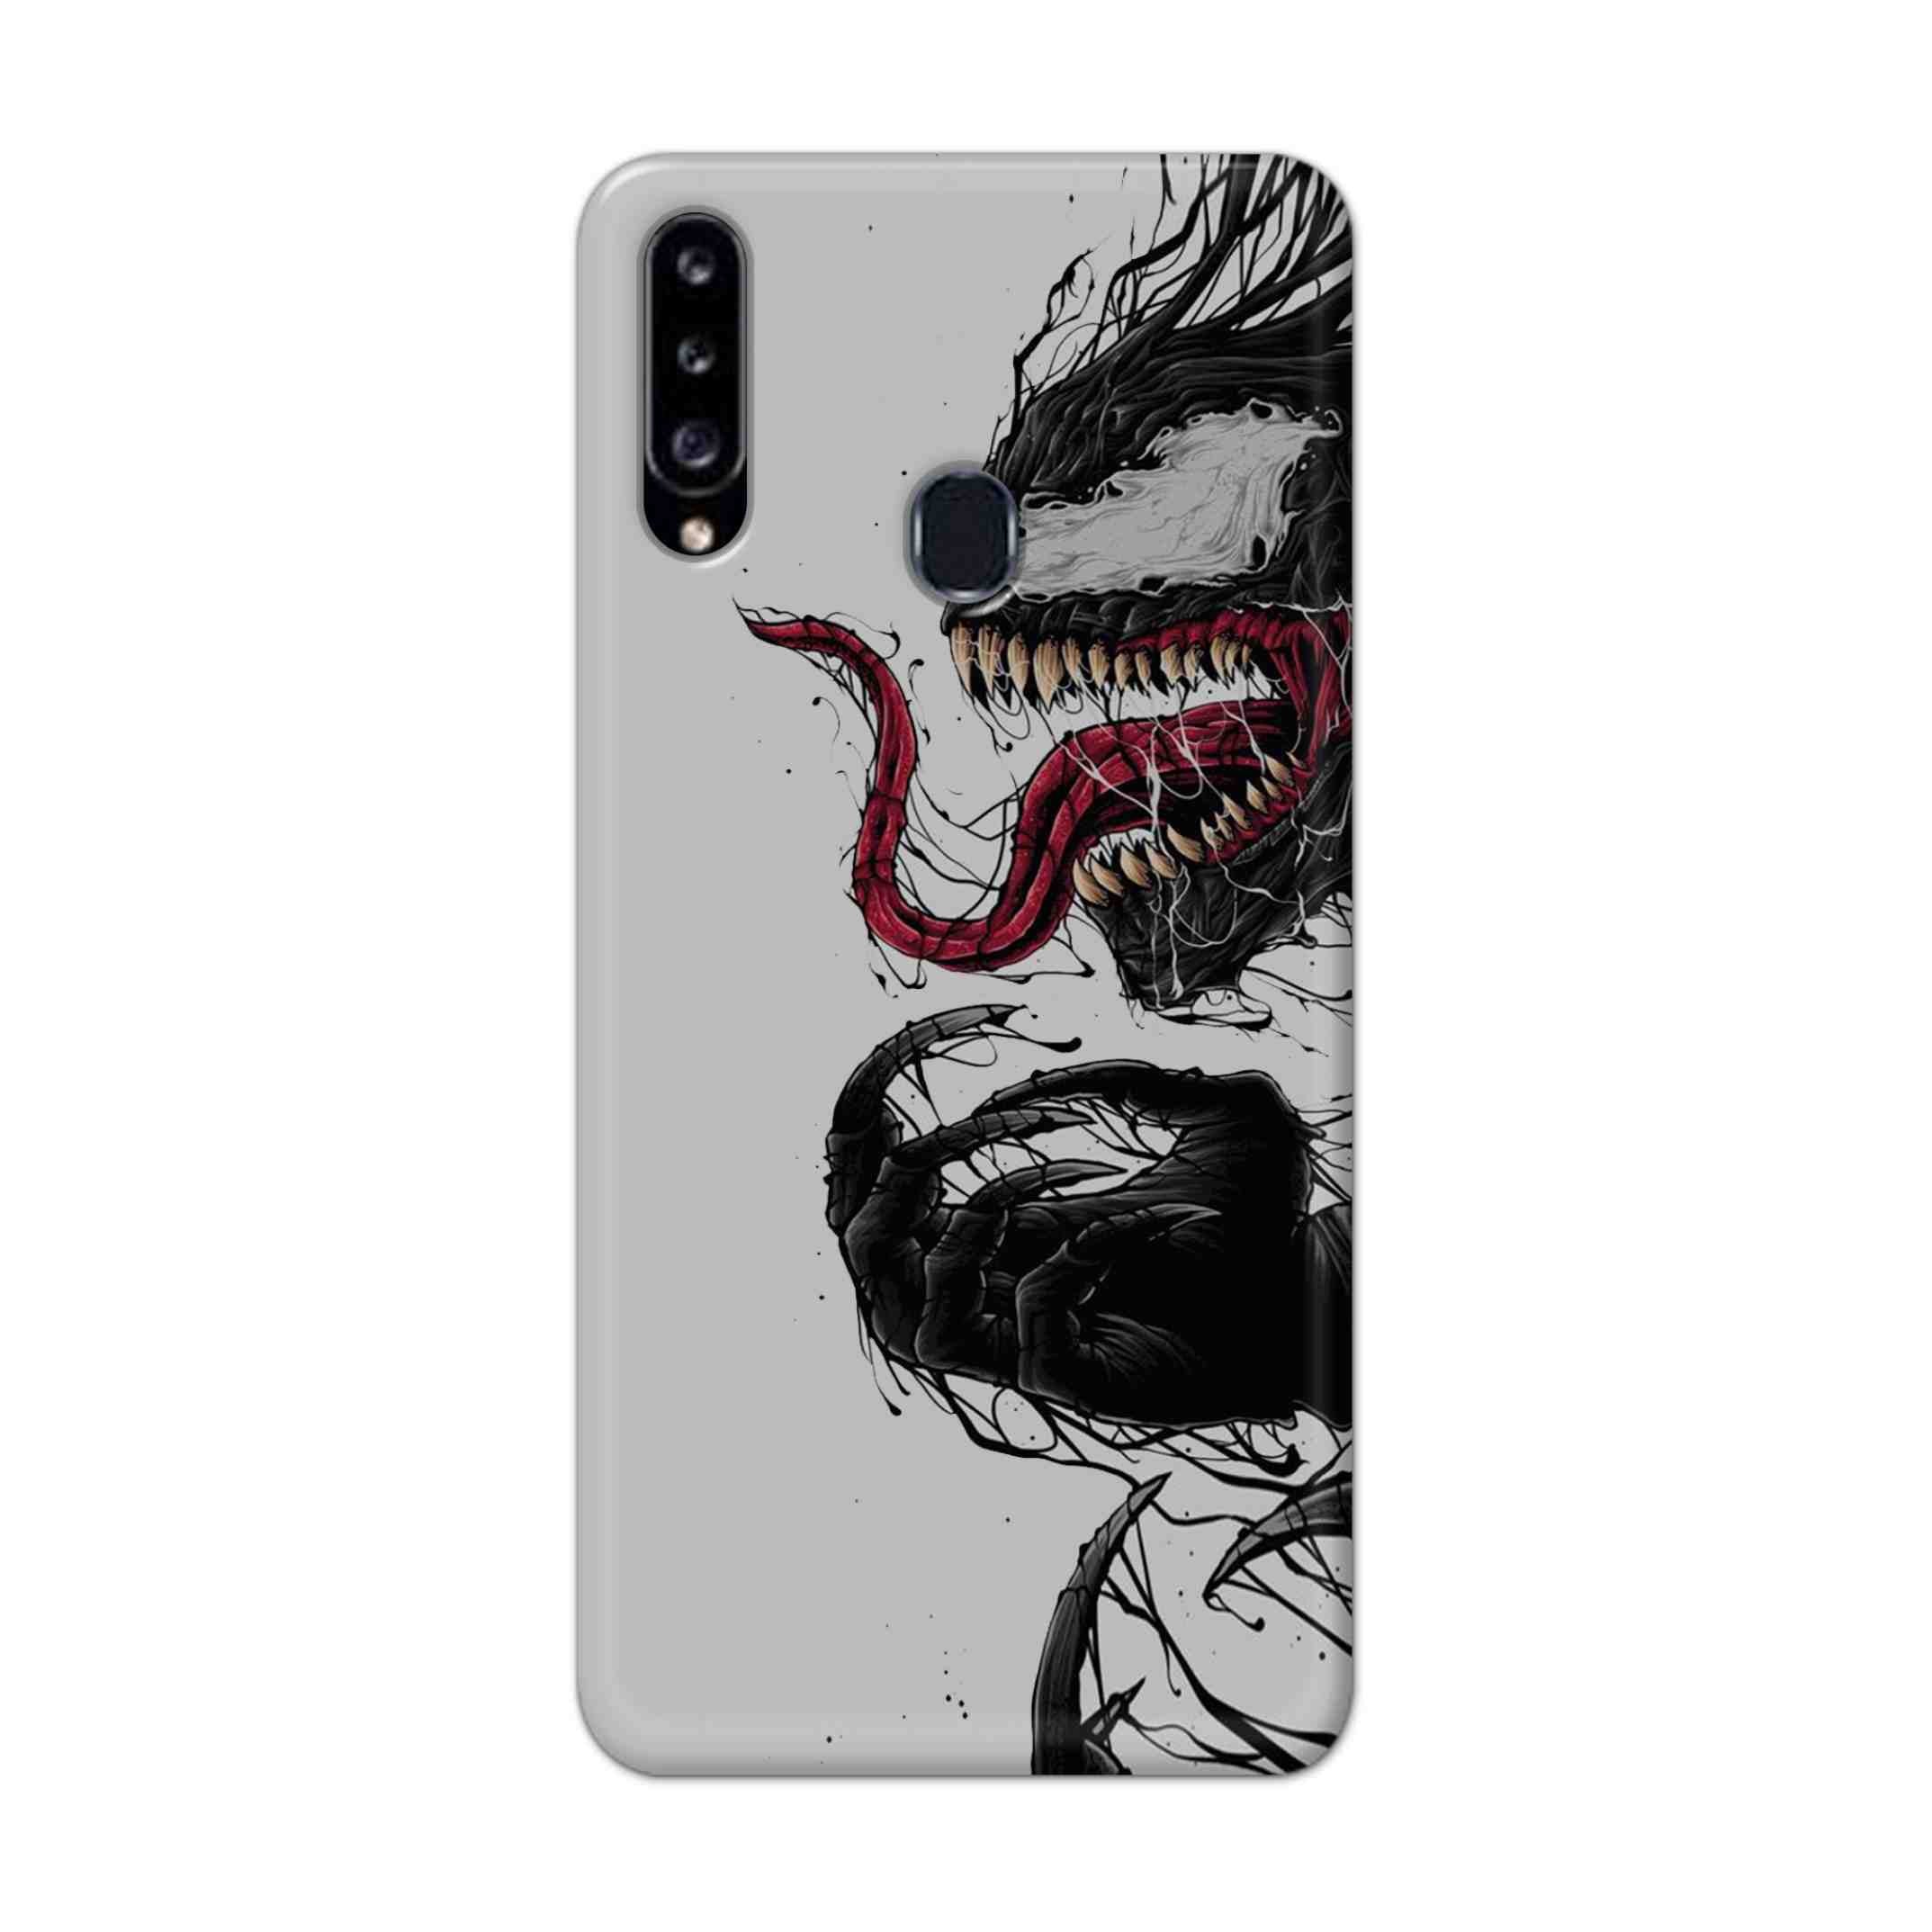 Buy Venom Crazy Hard Back Mobile Phone Case Cover For Samsung Galaxy A21 Online